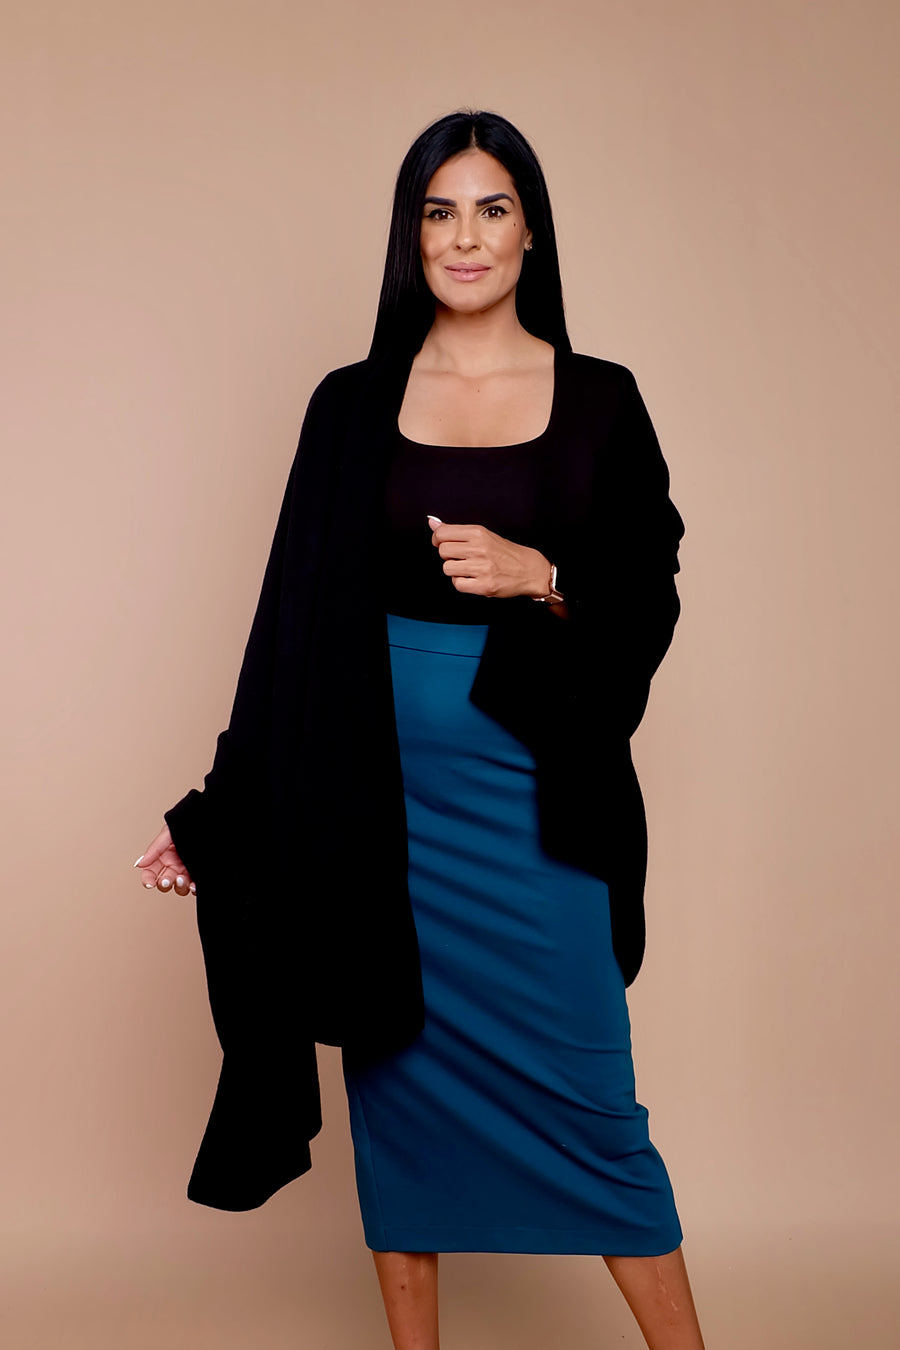 woman wearing blue pencil skirt with black sweater